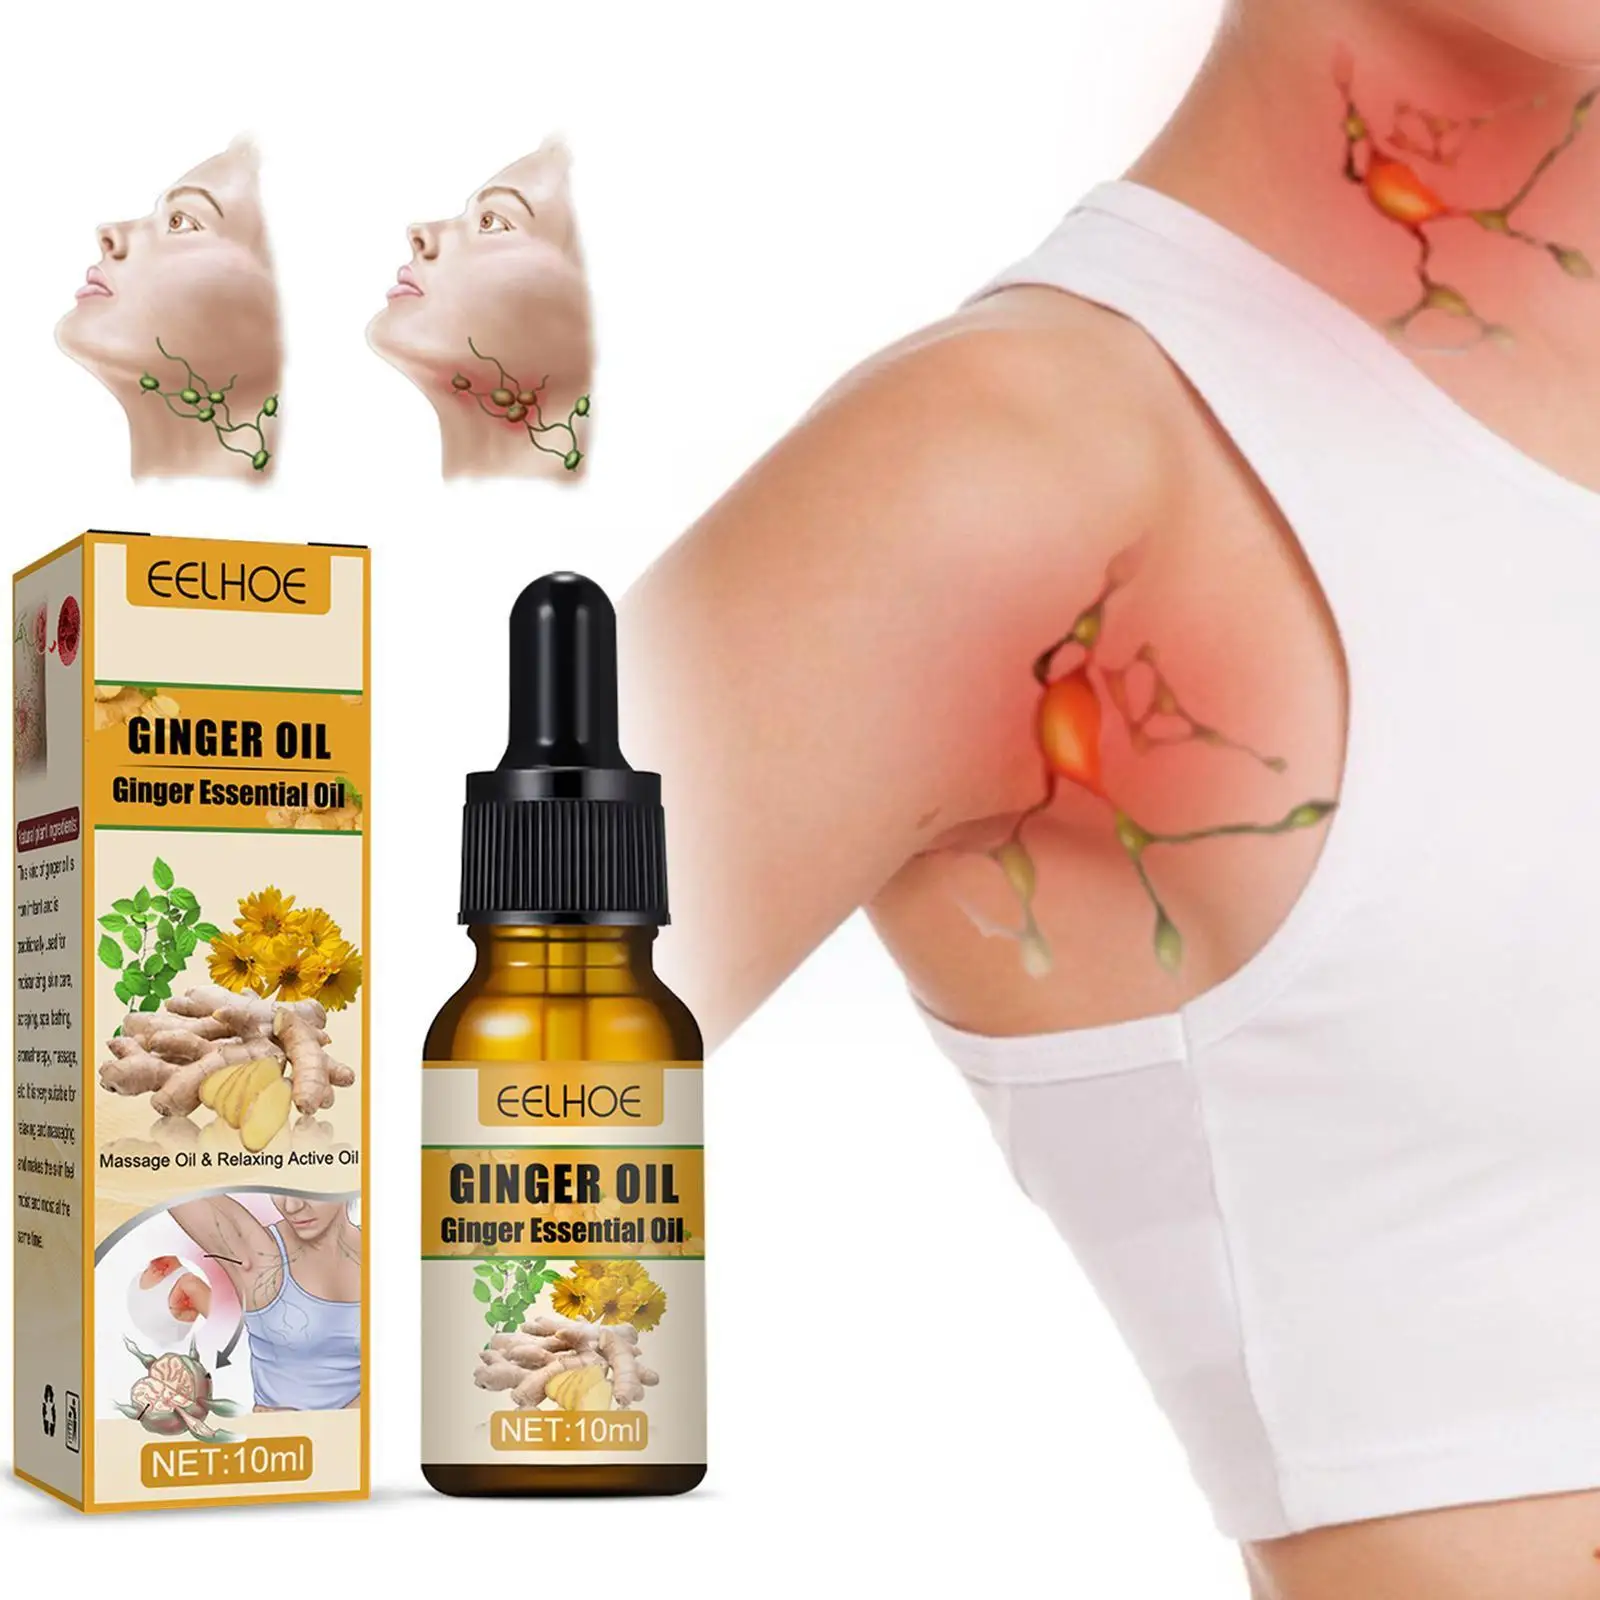 

Eelhoe Ginger Slimming Essential Oil Slimming Fat Mass Massage Slimming Oil Fat Beauty Care Body Oil Burning Health Care Ma H1N9